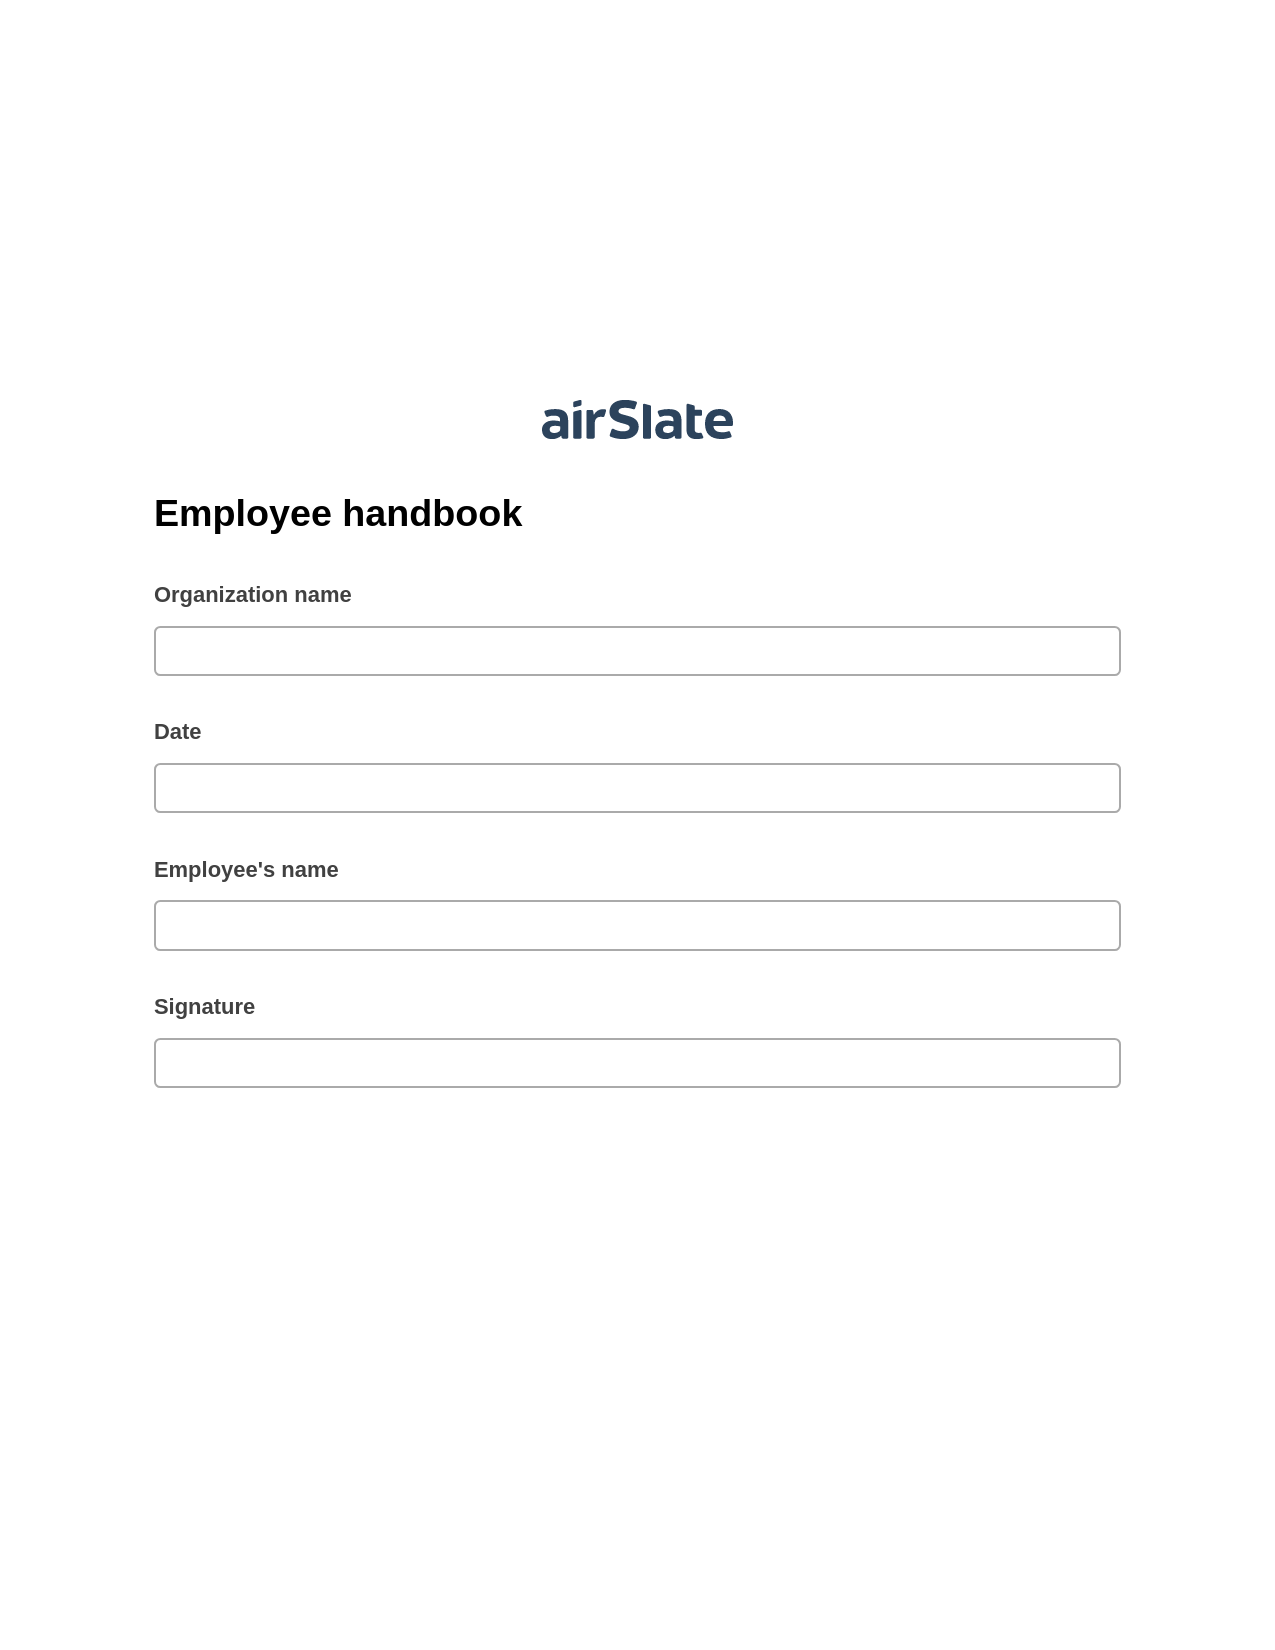 Multirole Employee handbook Pre-fill Dropdowns from MySQL Bot, Send Mailchimp Campaign Bot, Export to Formstack Documents Bot